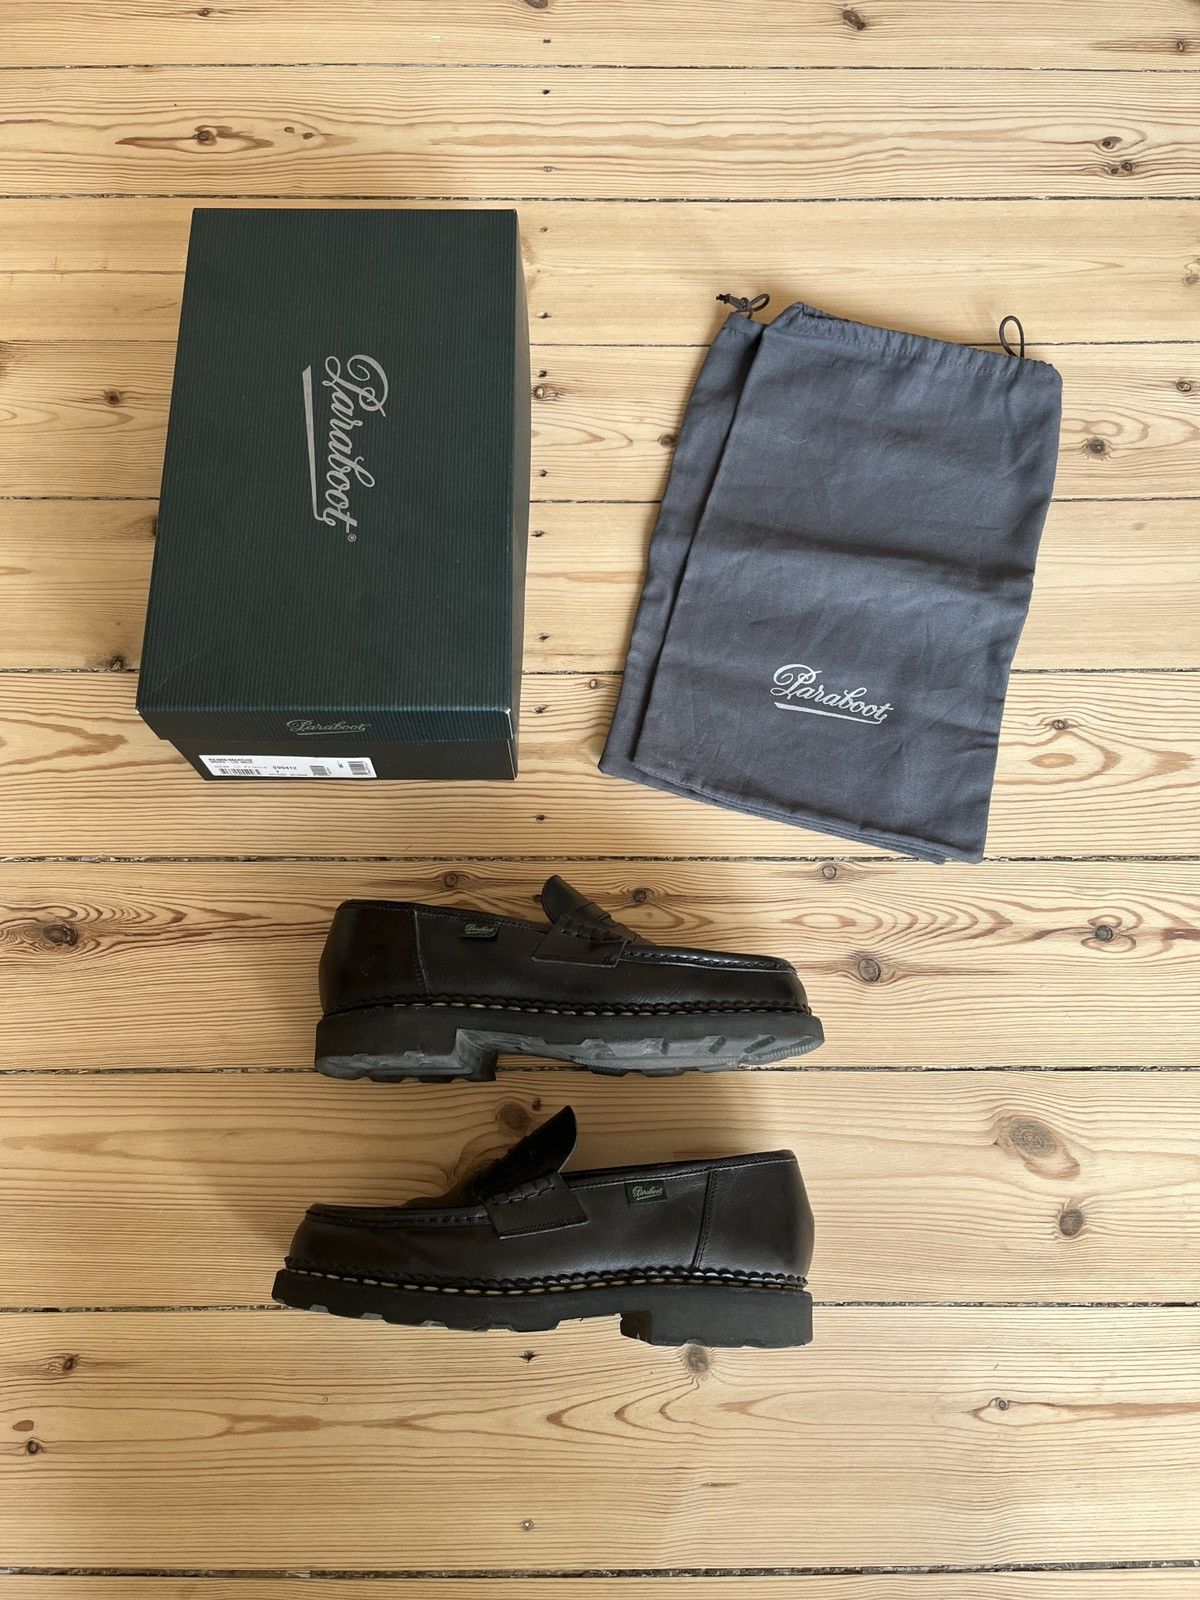 Paraboot Paraboot Reims Loafers | Grailed